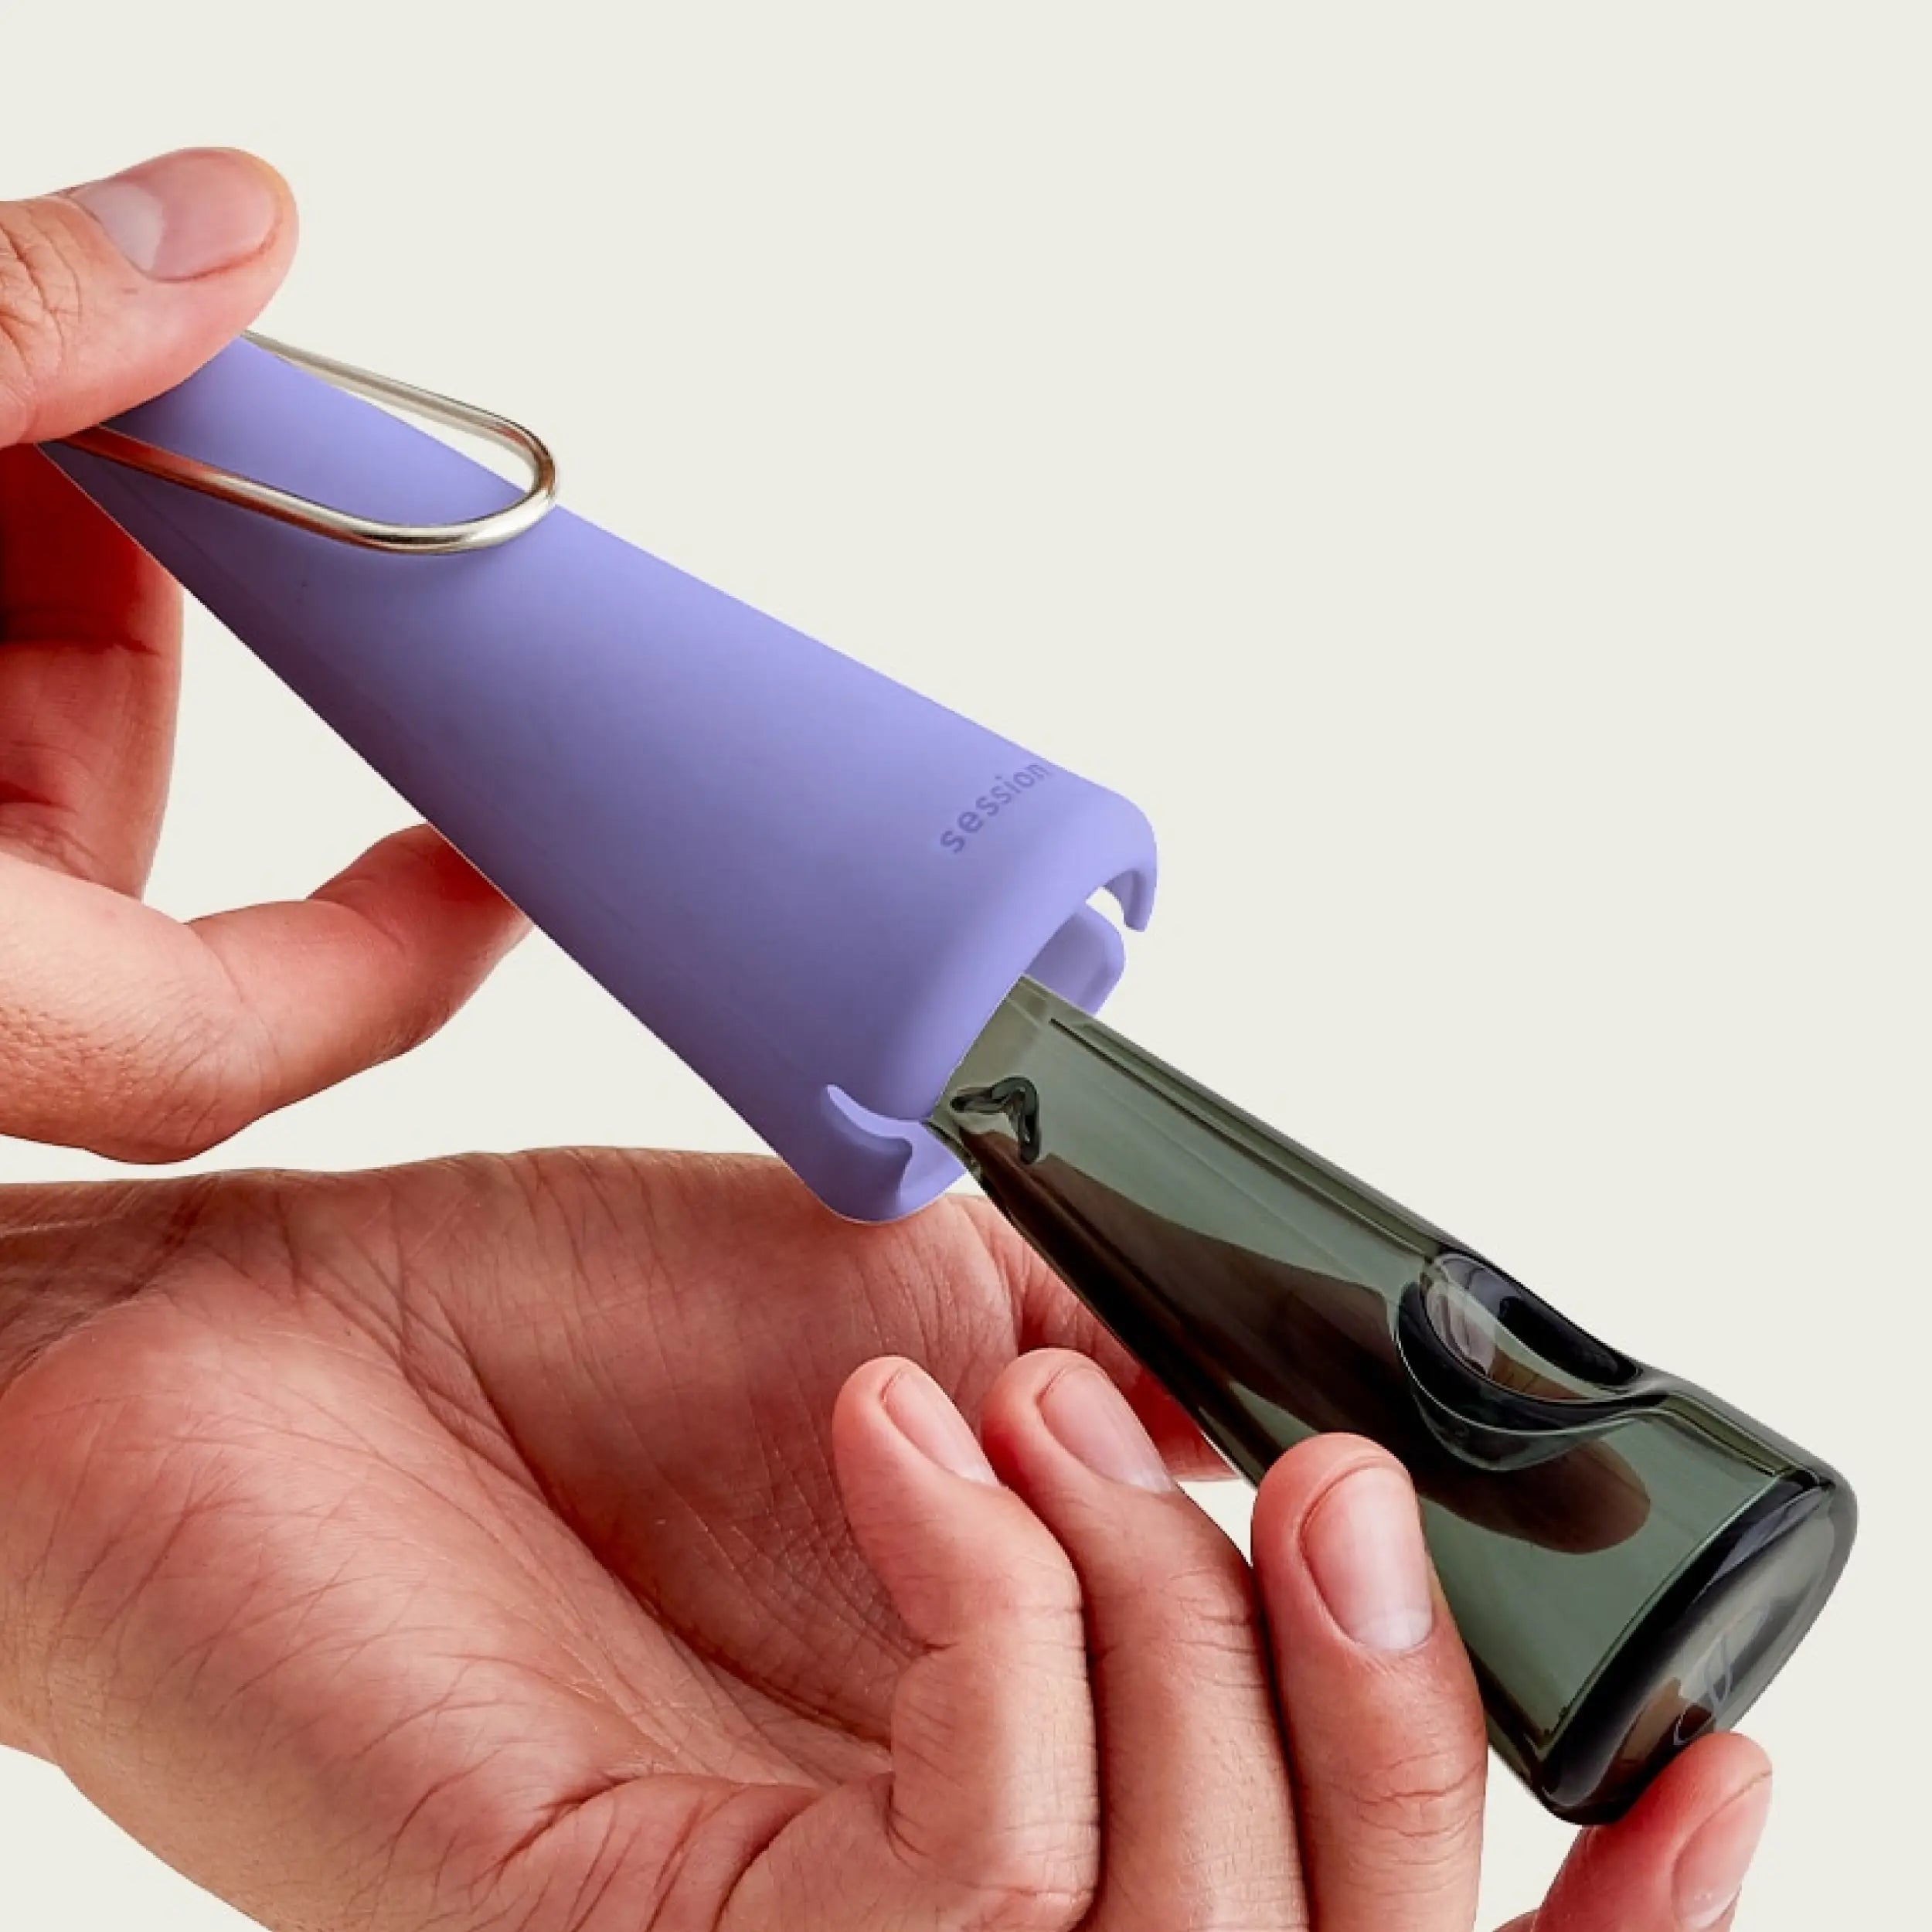 silicone sleeve holds durable glass pipe on-the-go and keeps it safe